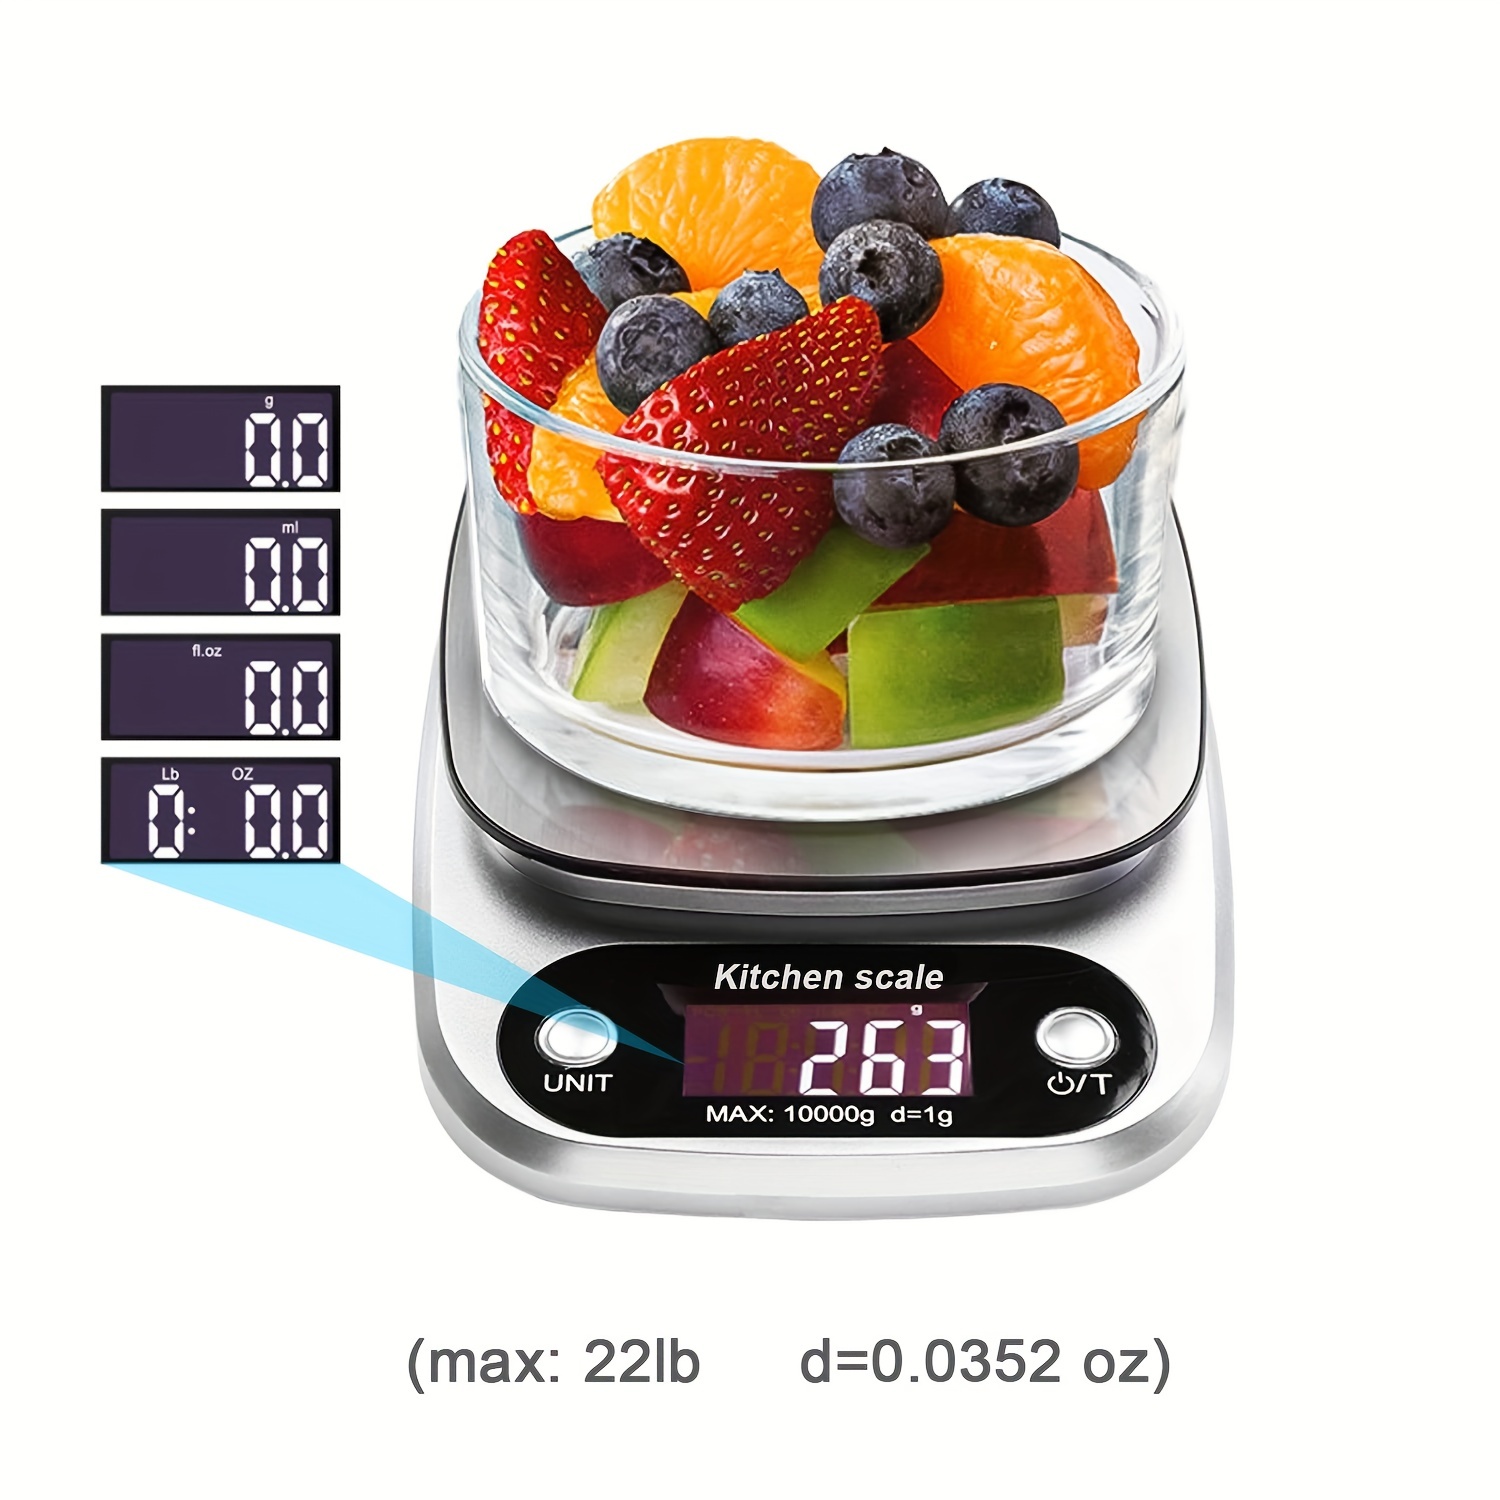 Food Kitchen Scale, Food Scales Digital Weight Grams and Oz, High Precision  Digital Scale, with 2 Trays, Tare Function, Baking, Cooking, LCD Display